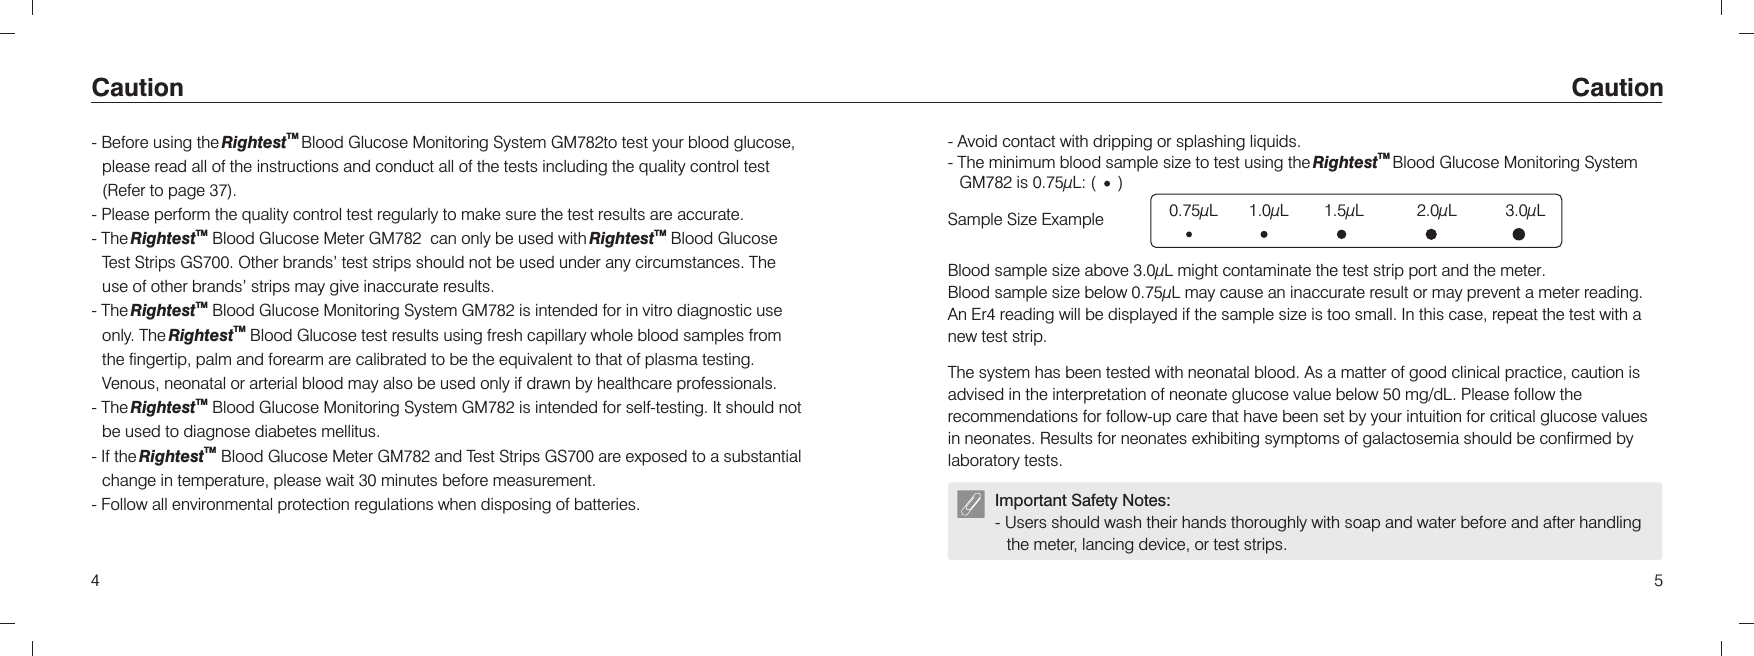 - Avoid contact with dripping or splashing liquids.- The minimum blood sample size to test using the   Blood Glucose Monitoring System  is 0.75µL: (     )TMRightestGM78254 Caution Caution Blood sample size above 3.0µL might contaminate the test strip port and the meter.Blood sample size below 0.75µL may cause an inaccurate result or may prevent a meter reading. An Er4 reading will be displayed if the sample size is too small. In this case, repeat the test with a new test strip.Sample Size ExampleImportant Safety Notes:- Users should wash their hands thoroughly with soap and water before and after handling the meter, lancing device, or test strips.0.75µL       1.0µL        1.5µL            2.0µL           3.0µL - Before using the   Blood Glucose Monitoring System  to test your blood glucose, please read all of the instructions and conduct all of the tests including the quality control test- Please perform the quality control test regularly to make sure the test results are accurate.TM TMRightest   GM782   RightestGS700 Other brands’ test strips should not be used under any circumstances. The use of other brands’ strips may give inaccurate results.TM The Rightest  Blood Glucose Monitoring System GM782 is intended for in vitro diagnostic use TMonly. The Rightest  Blood Glucose test results using fresh capillary whole blood samples from the fingertip, palm and forearm are calibrated to be the equivalent to that of plasma testing. Venous, neonatal or arterial blood may also be used only if drawn by healthcare professionals.TMRightest GM782TM- If the Rightest Blood Glucose Meter GM782 and Test Strips GS700 are exposed to a substantial change in temperature, please wait 30 minutes before measurement.- Follow all environmental protection regulations when disposing of batteries.TMRightest GM782 (Refer to page 37). - The Blood Glucose Meter  can only be used with  Blood Glucose Test Strips  . -- The  Blood Glucose Monitoring System   is intended for self-testing. It should not be used to diagnose diabetes mellitus. The system has been tested with neonatal blood. As a matter of good clinical practice, caution is advised in the interpretation of neonate glucose value below 50 mg/dL. Please follow the recommendations for follow-up care that have been set by your intuition for critical glucose values in neonates. Results for neonates exhibiting symptoms of galactosemia should be confirmed by laboratory tests.